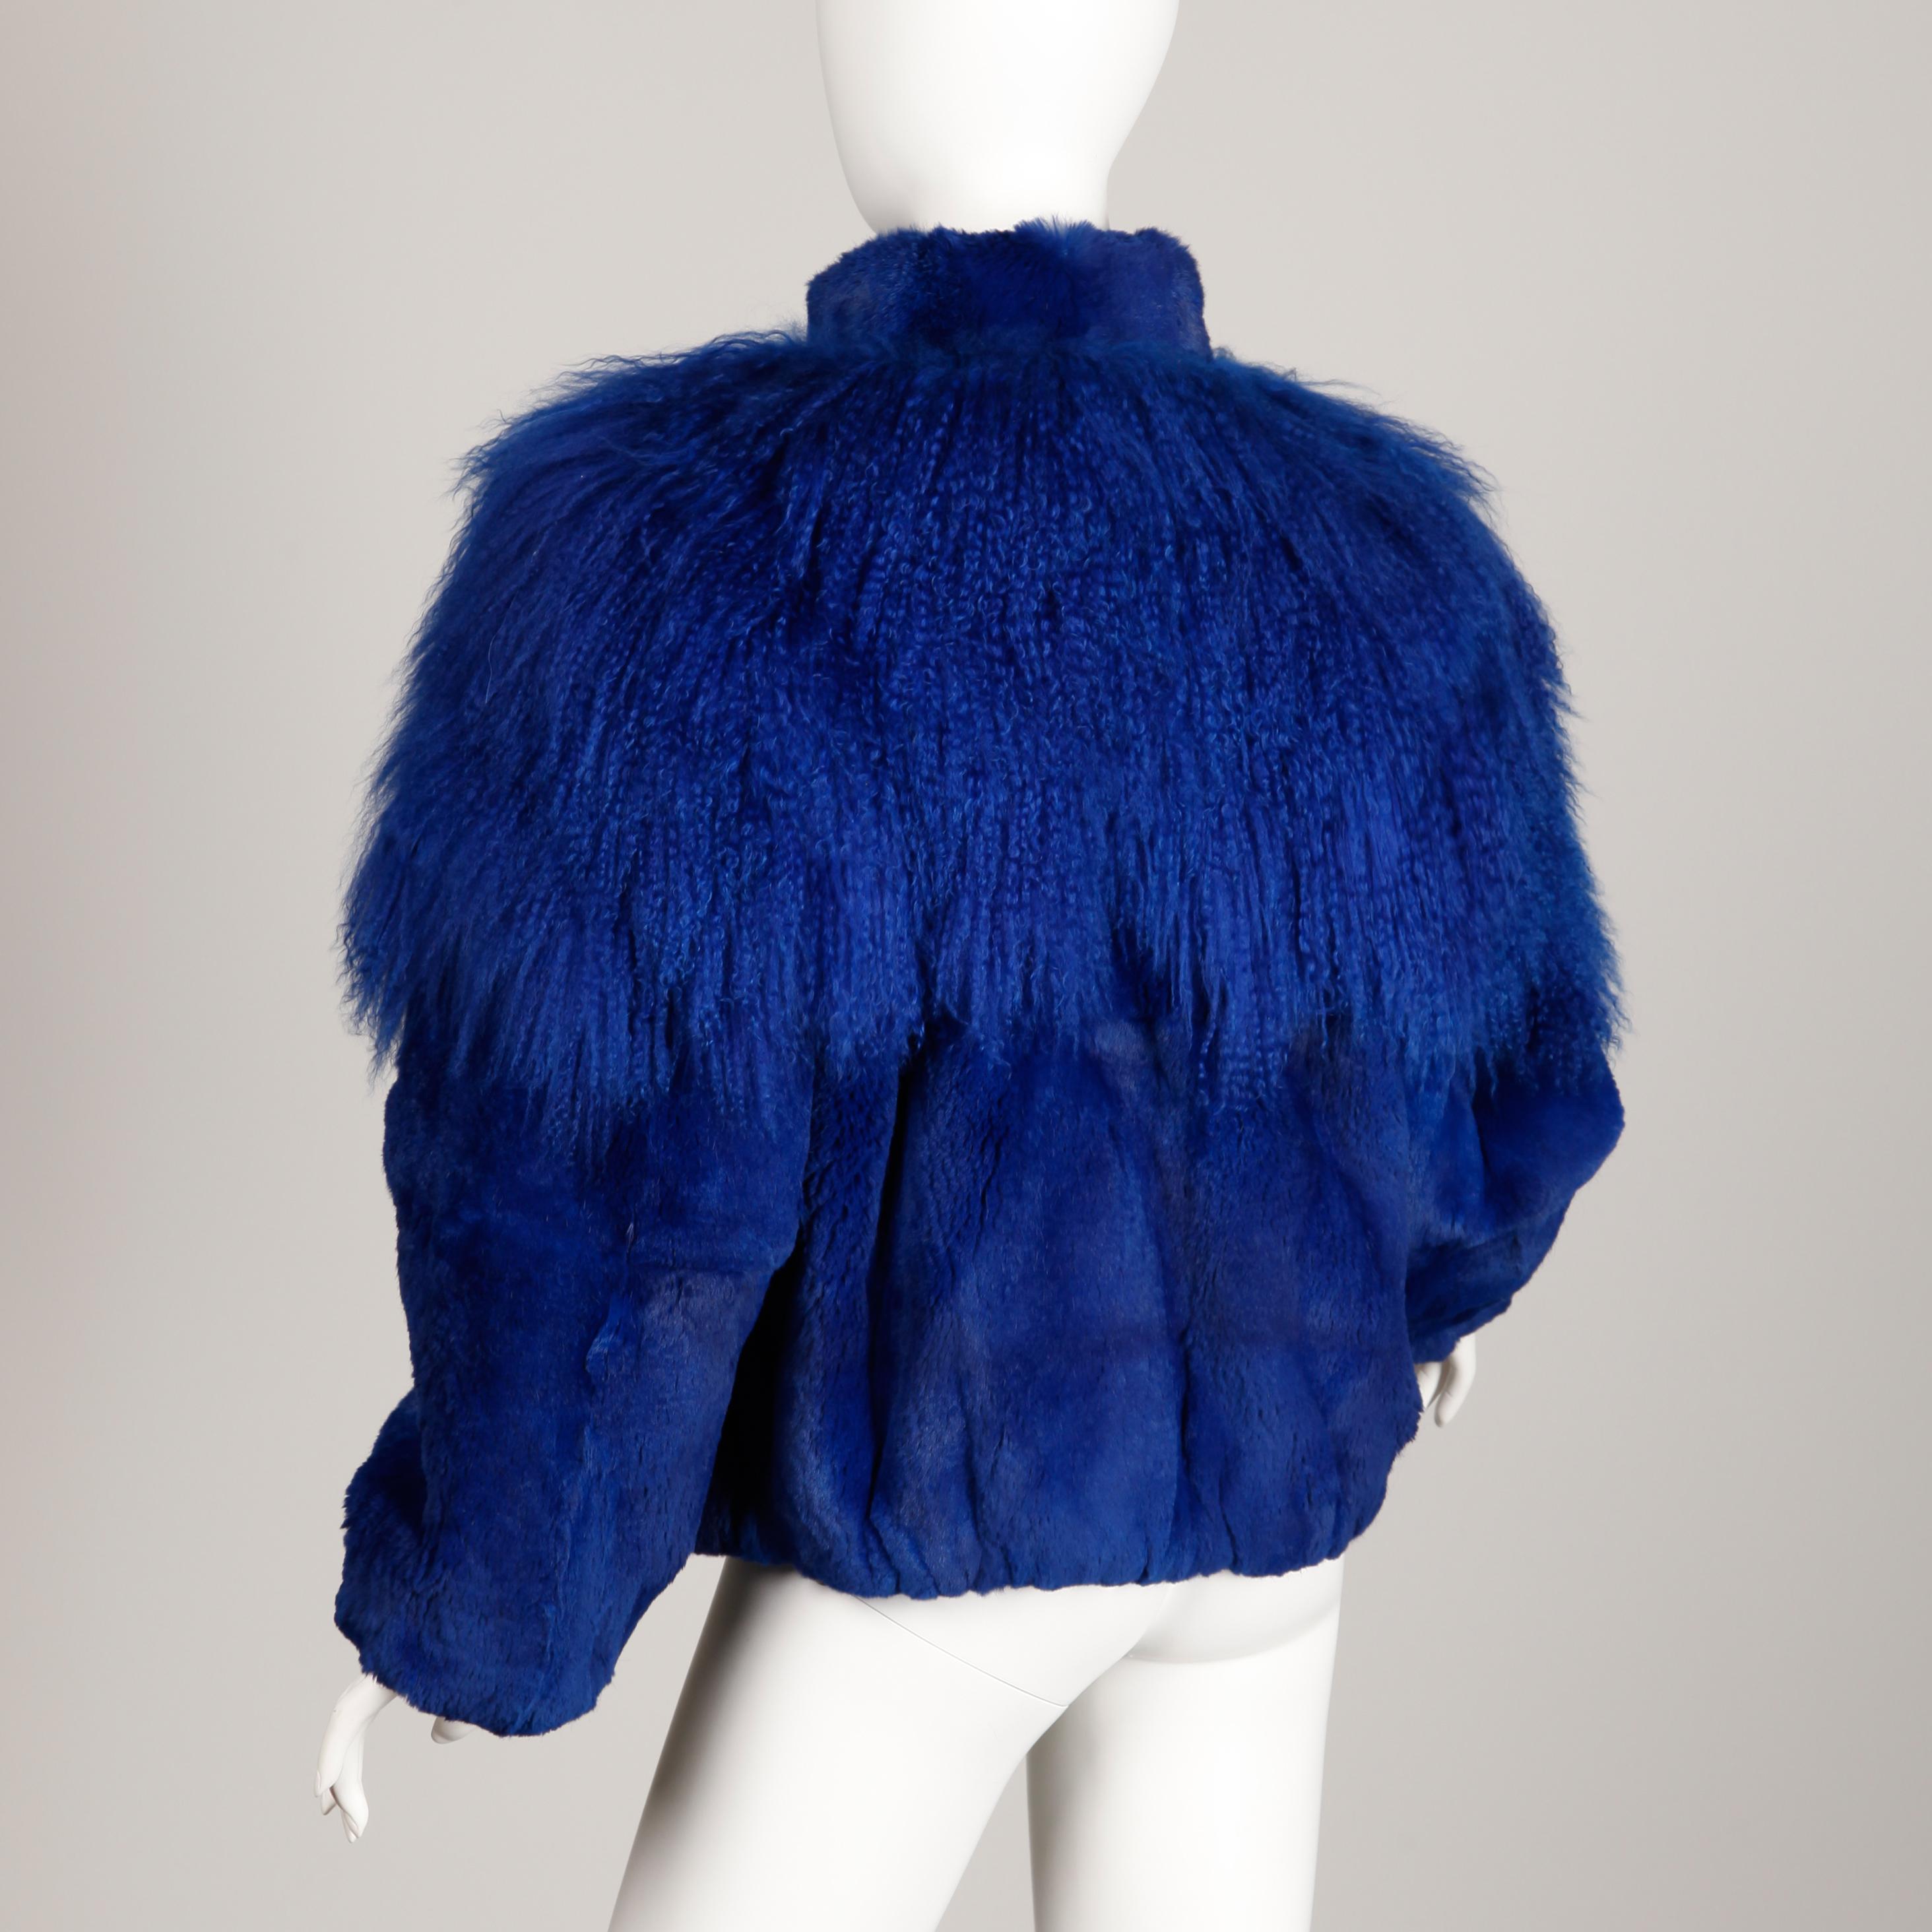 Blue Dyed Mongolian Lamb + Sheared Rabbit Fur Jacket In Excellent Condition For Sale In Sparks, NV